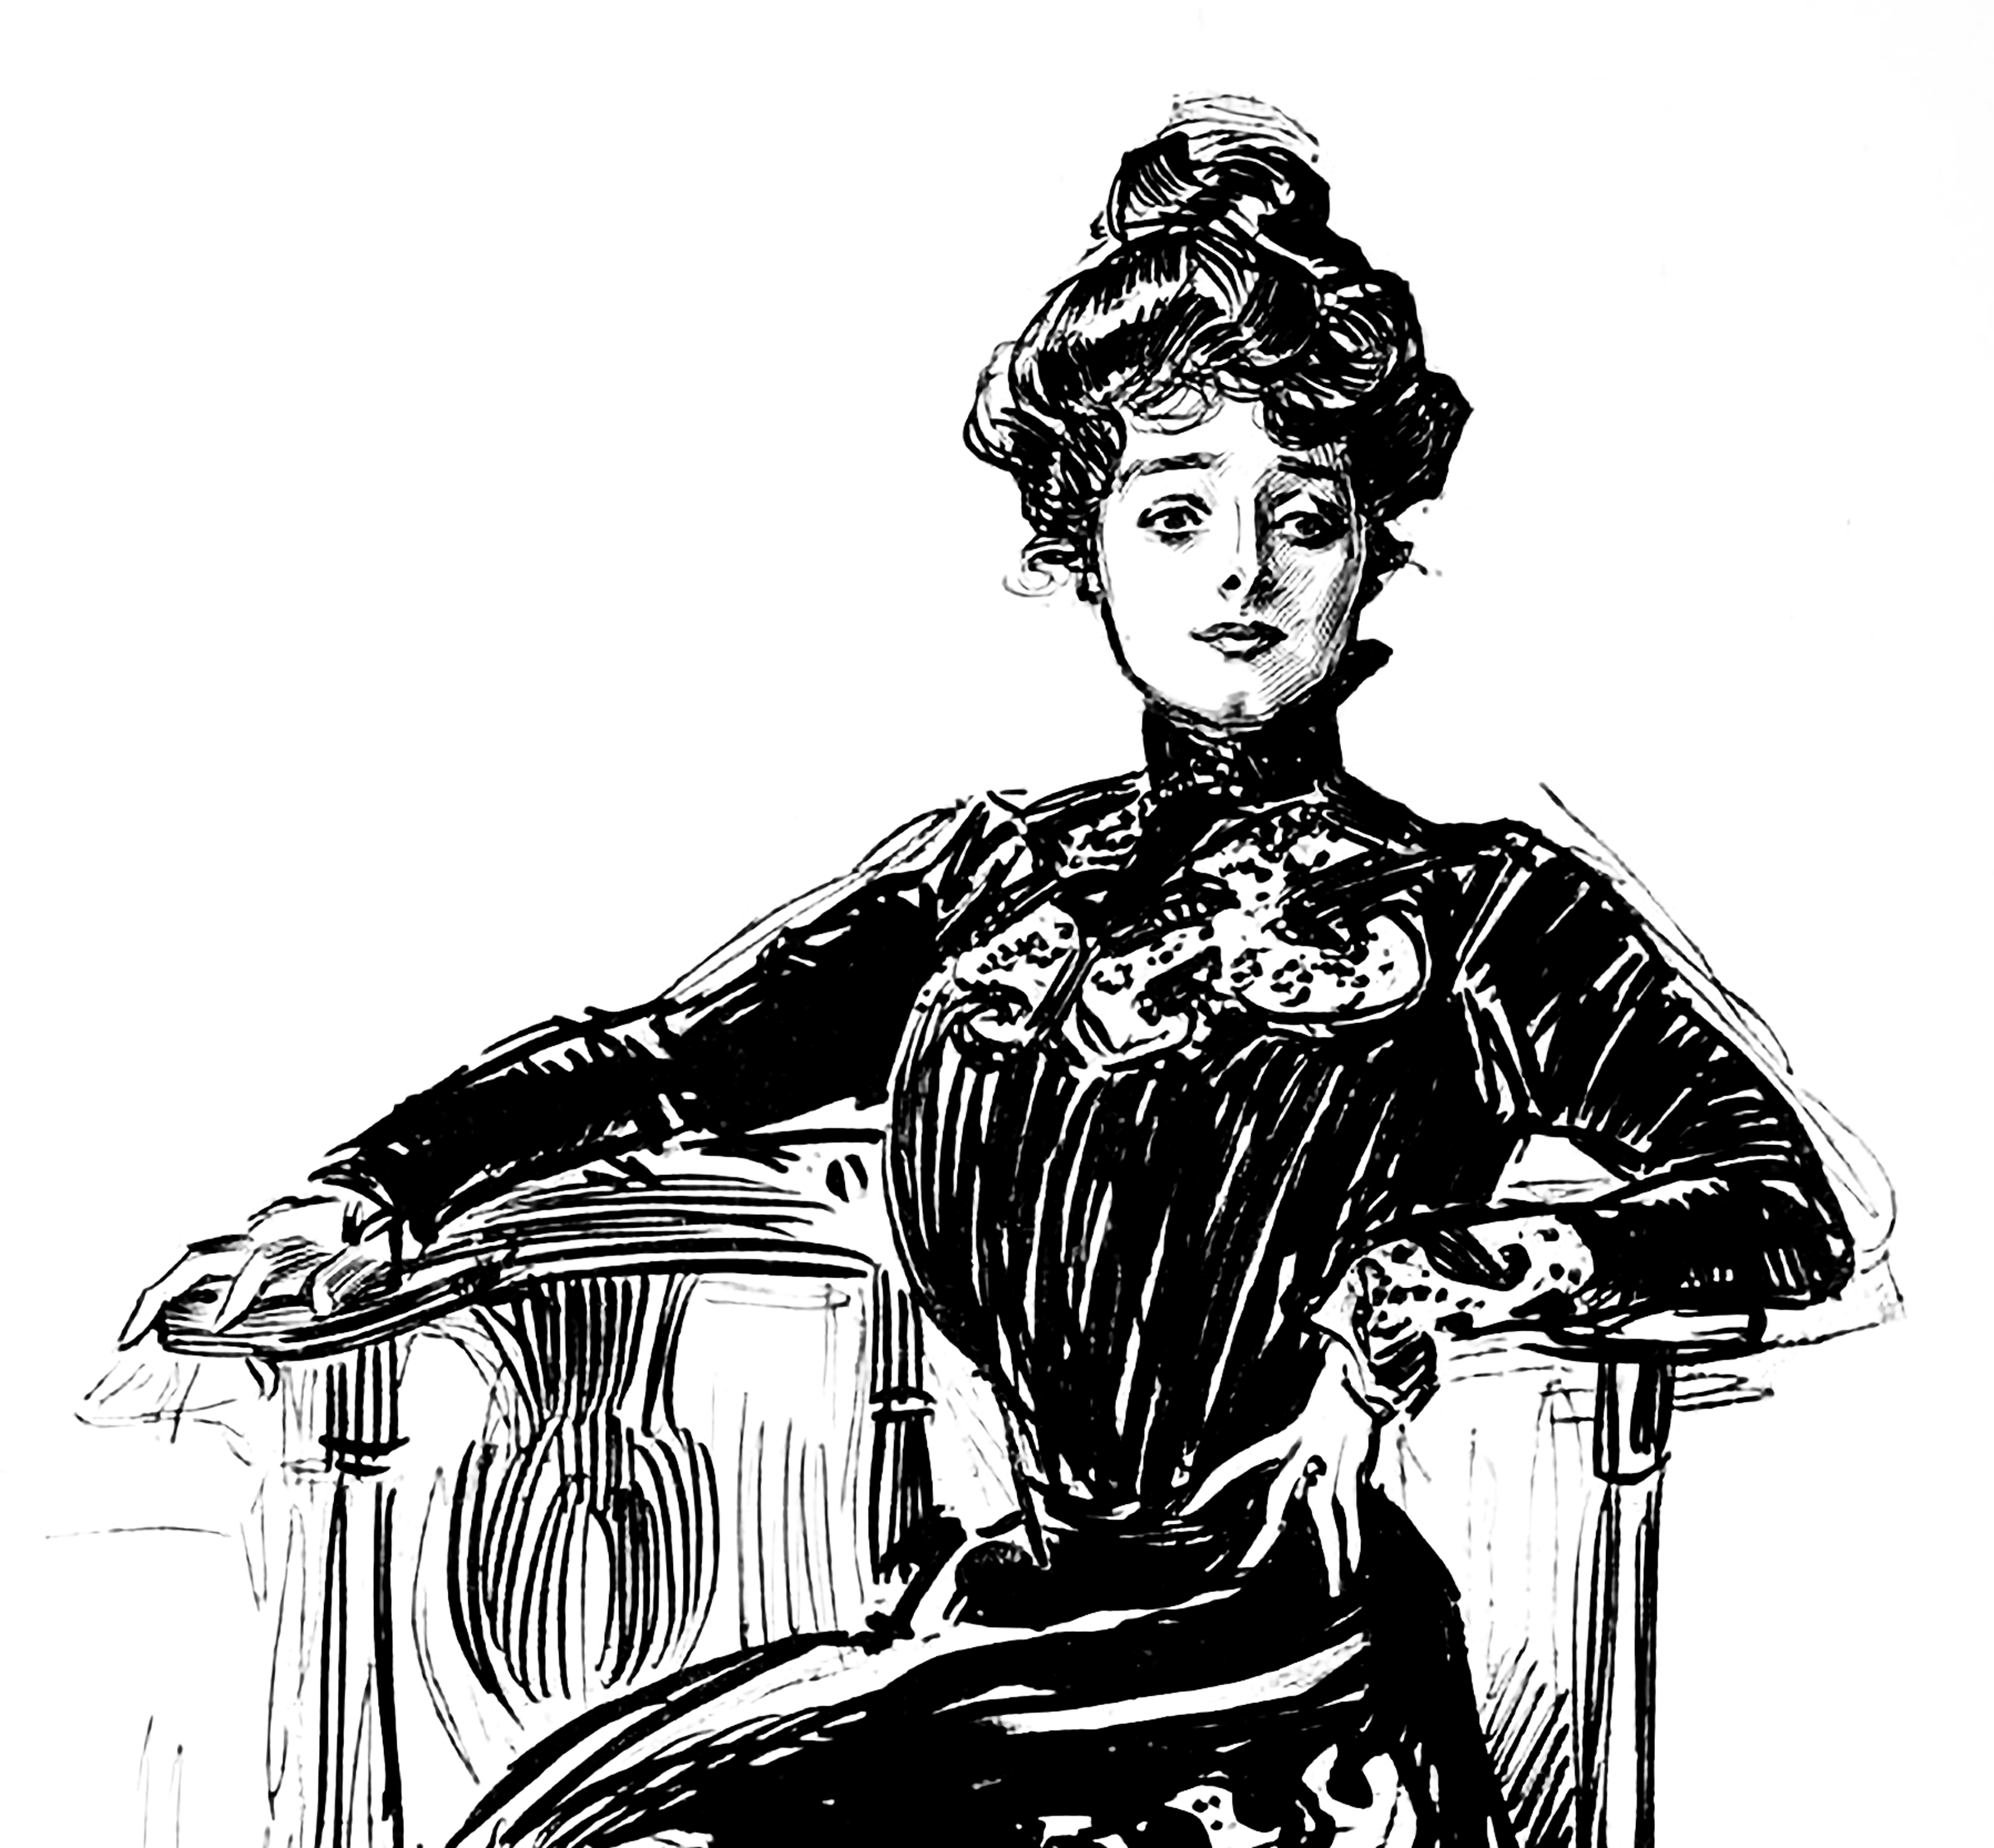 A black and white drawing, by Charles Dana Gibson circa 1900, of an elegant young lady in an old-fashioned high-collared dress